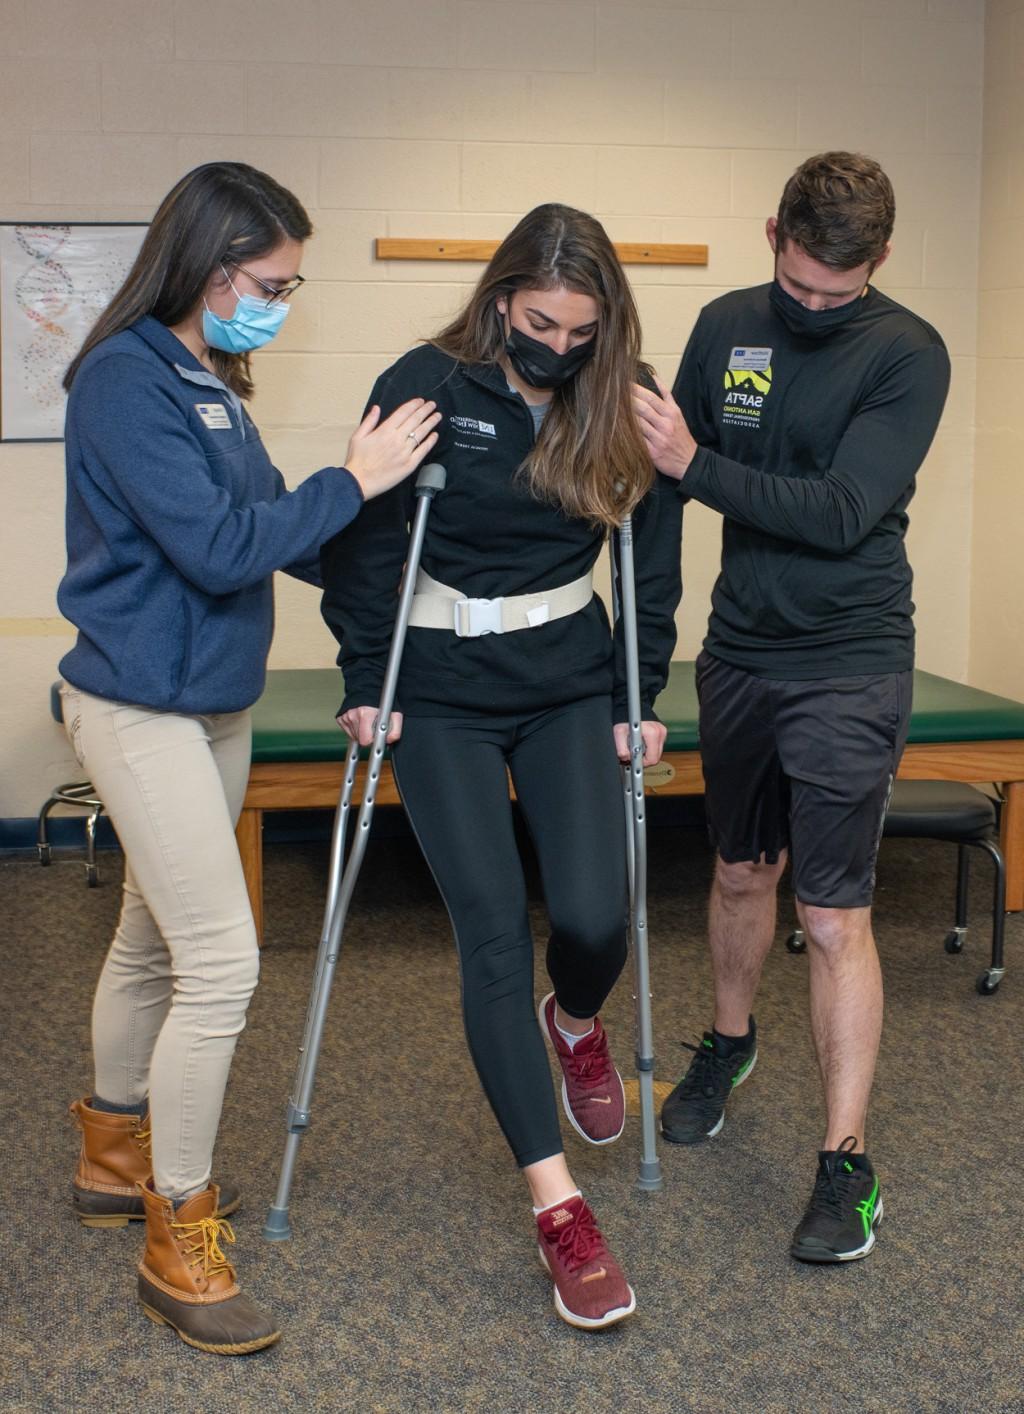 Two Physical Therapy students practice assisting a patient with new crutches